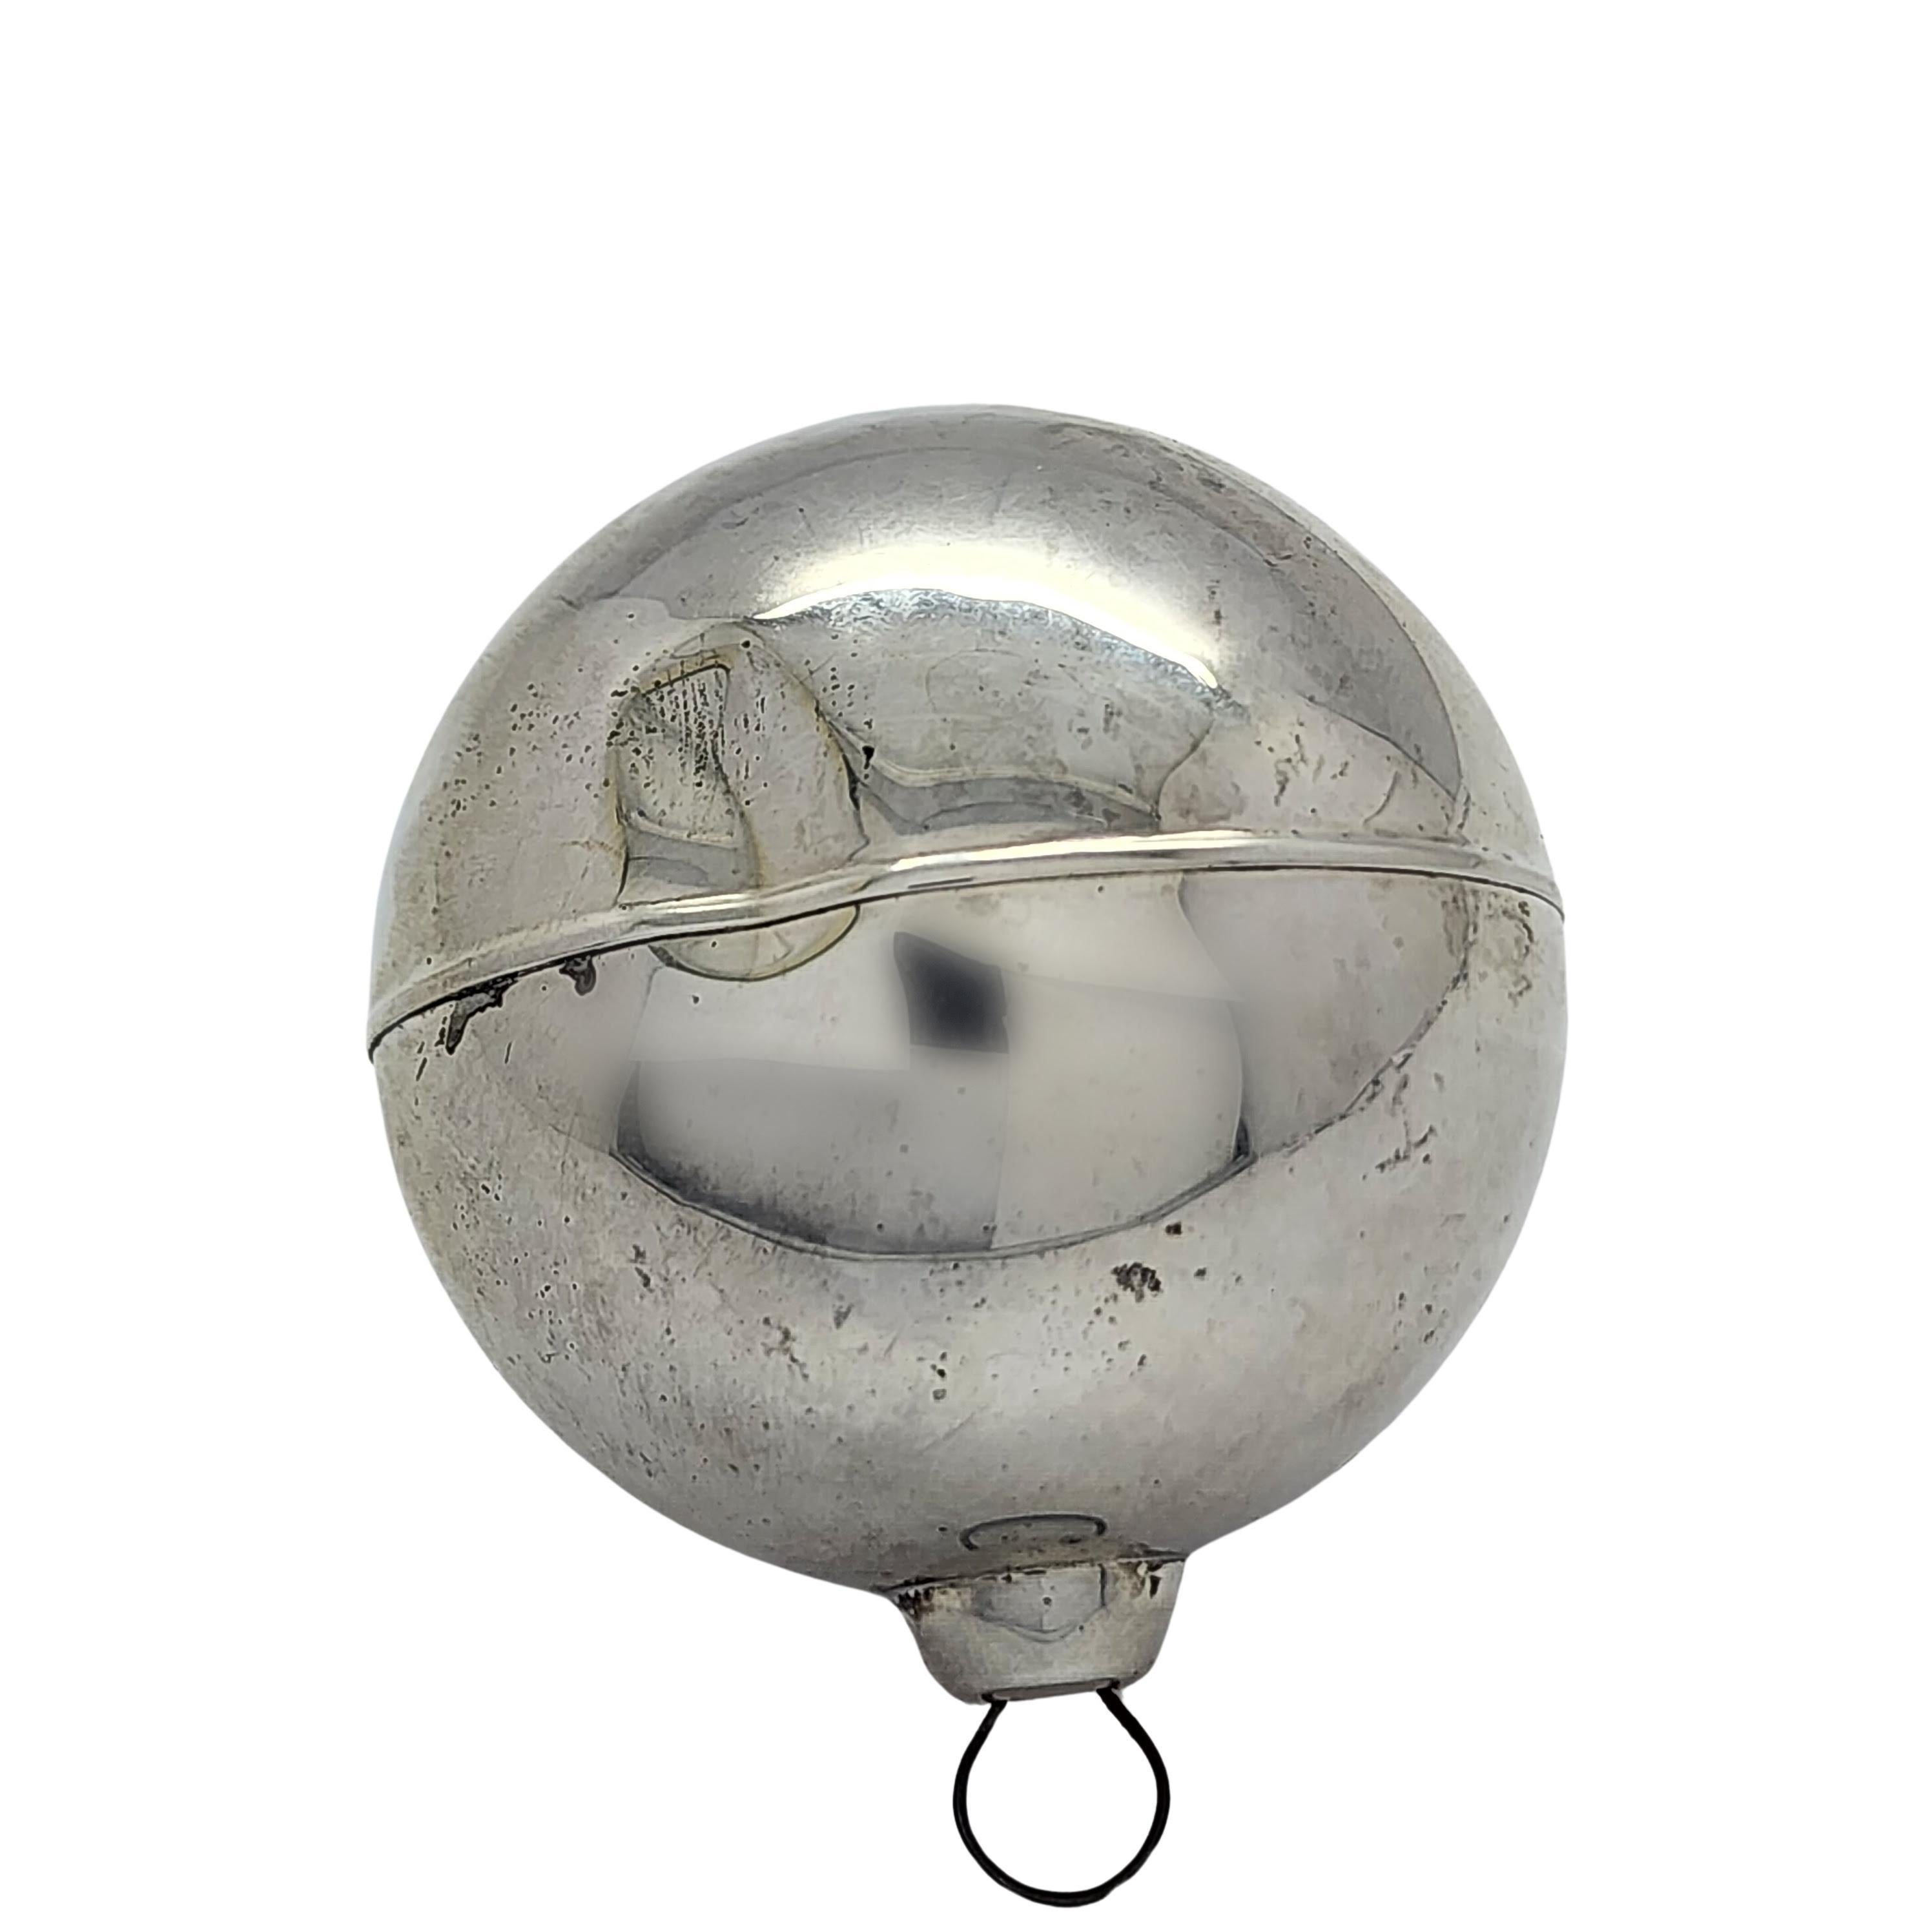 Towle Sterling Silver Ball Christmas Tree Ornament #15739 3